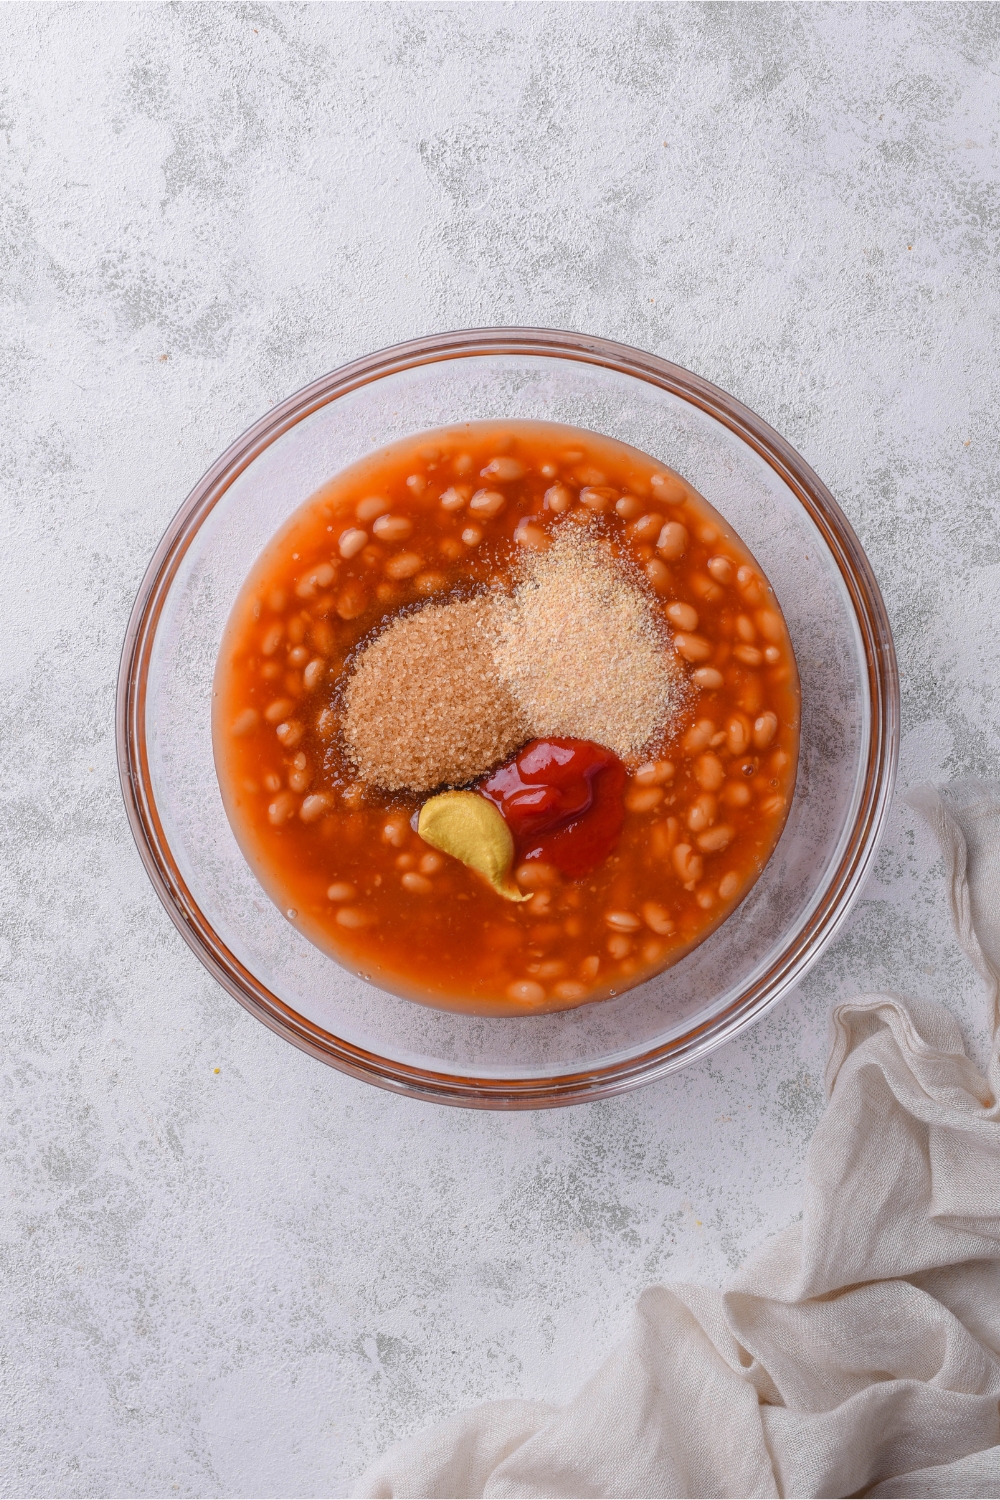 Canned beans with brown sugar, ketchup, mustard, garlic powder, and onion powder in a glass bowl.